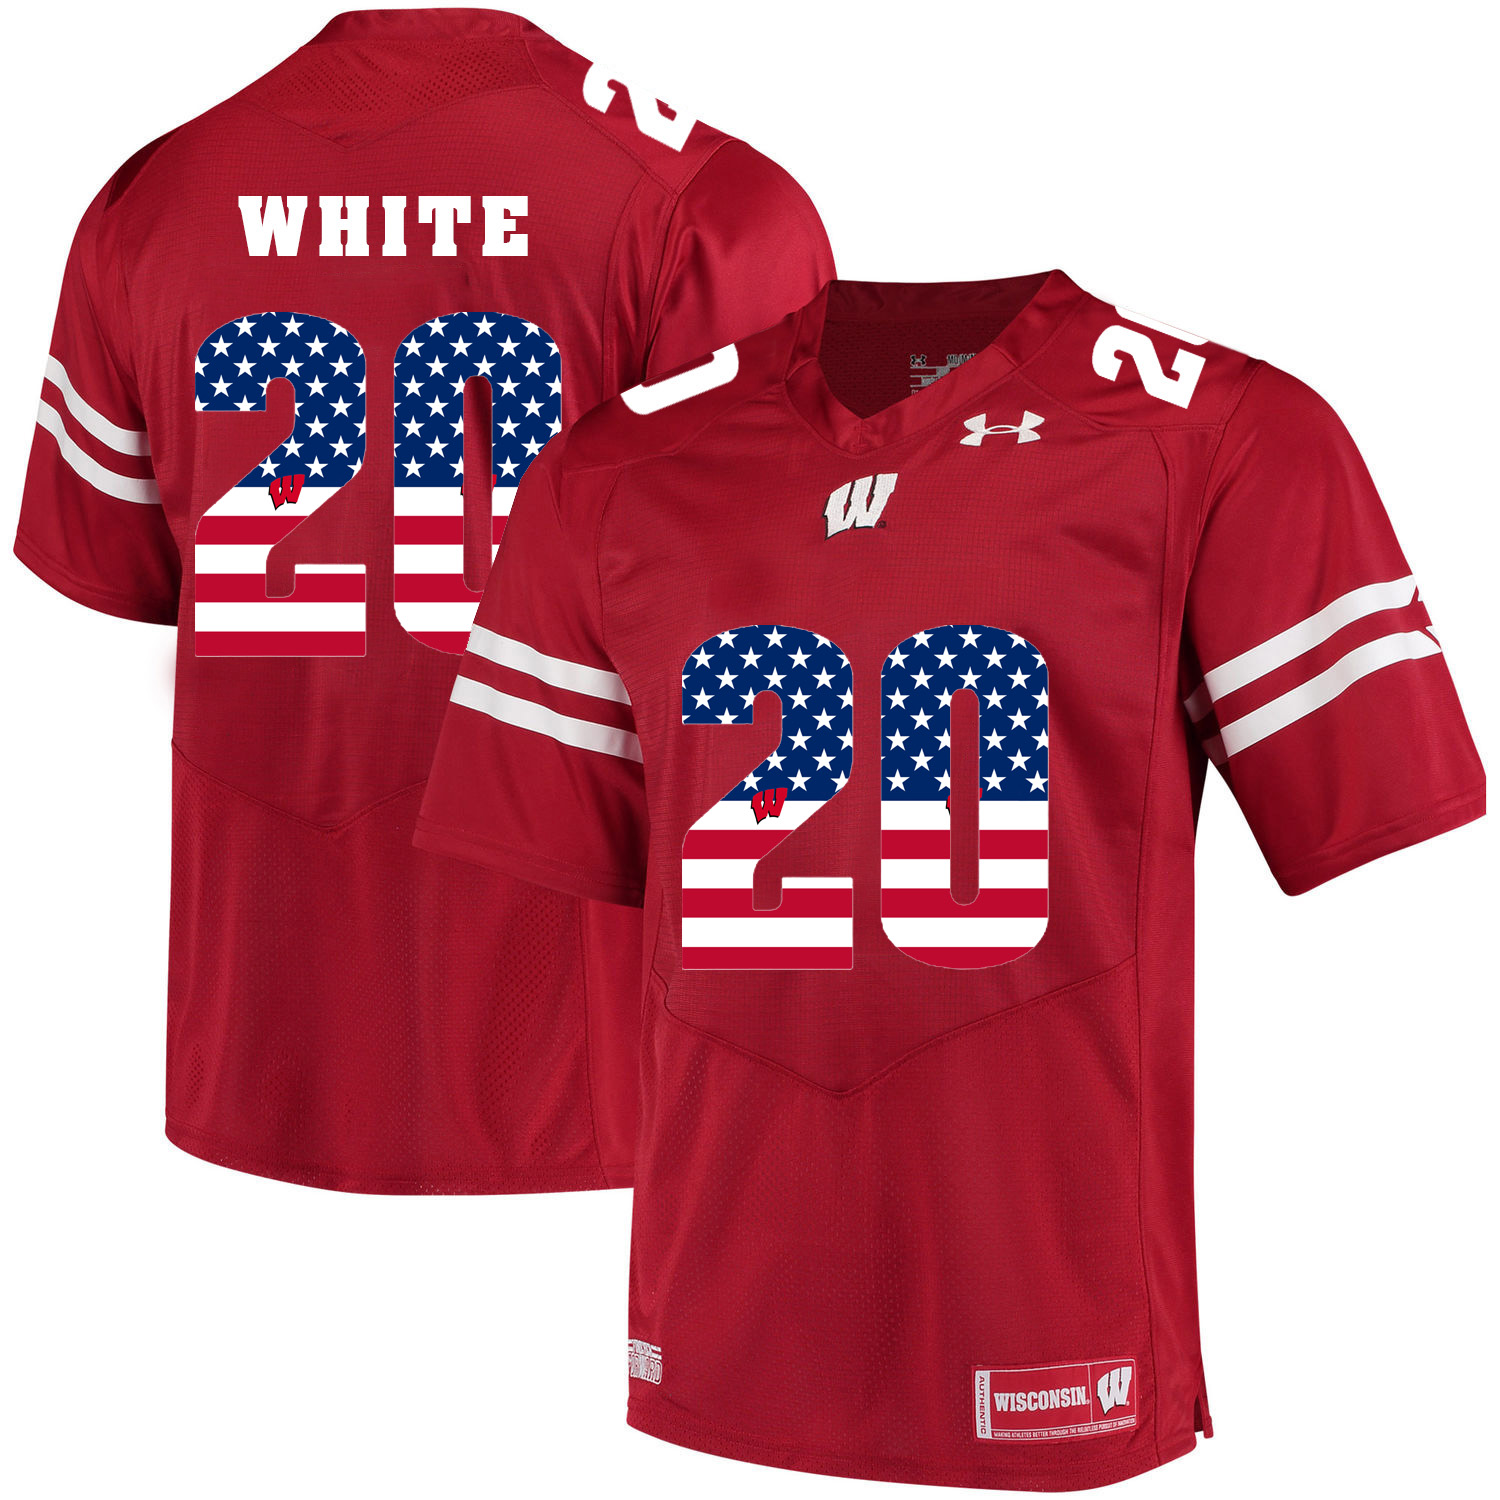 Wisconsin Badgers 20 James Red White USA Flag College Football Jersey